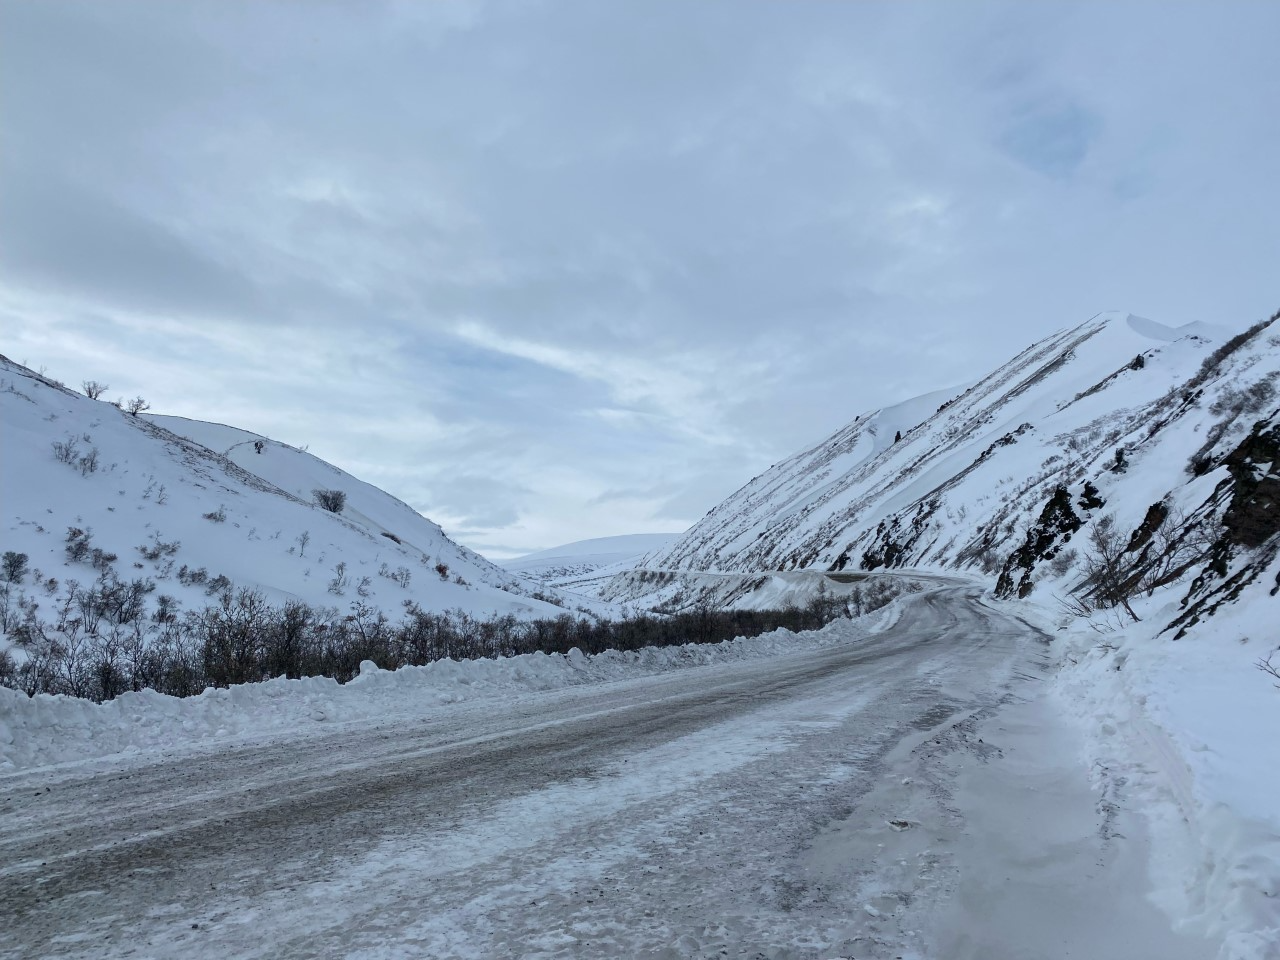 A road that has been mostly cleared of snow gradually climbs uphill at the base of a mountain. A thin layer of compacted snow remains on the road surface, but lots of gravel underneath can be seen through the snow.